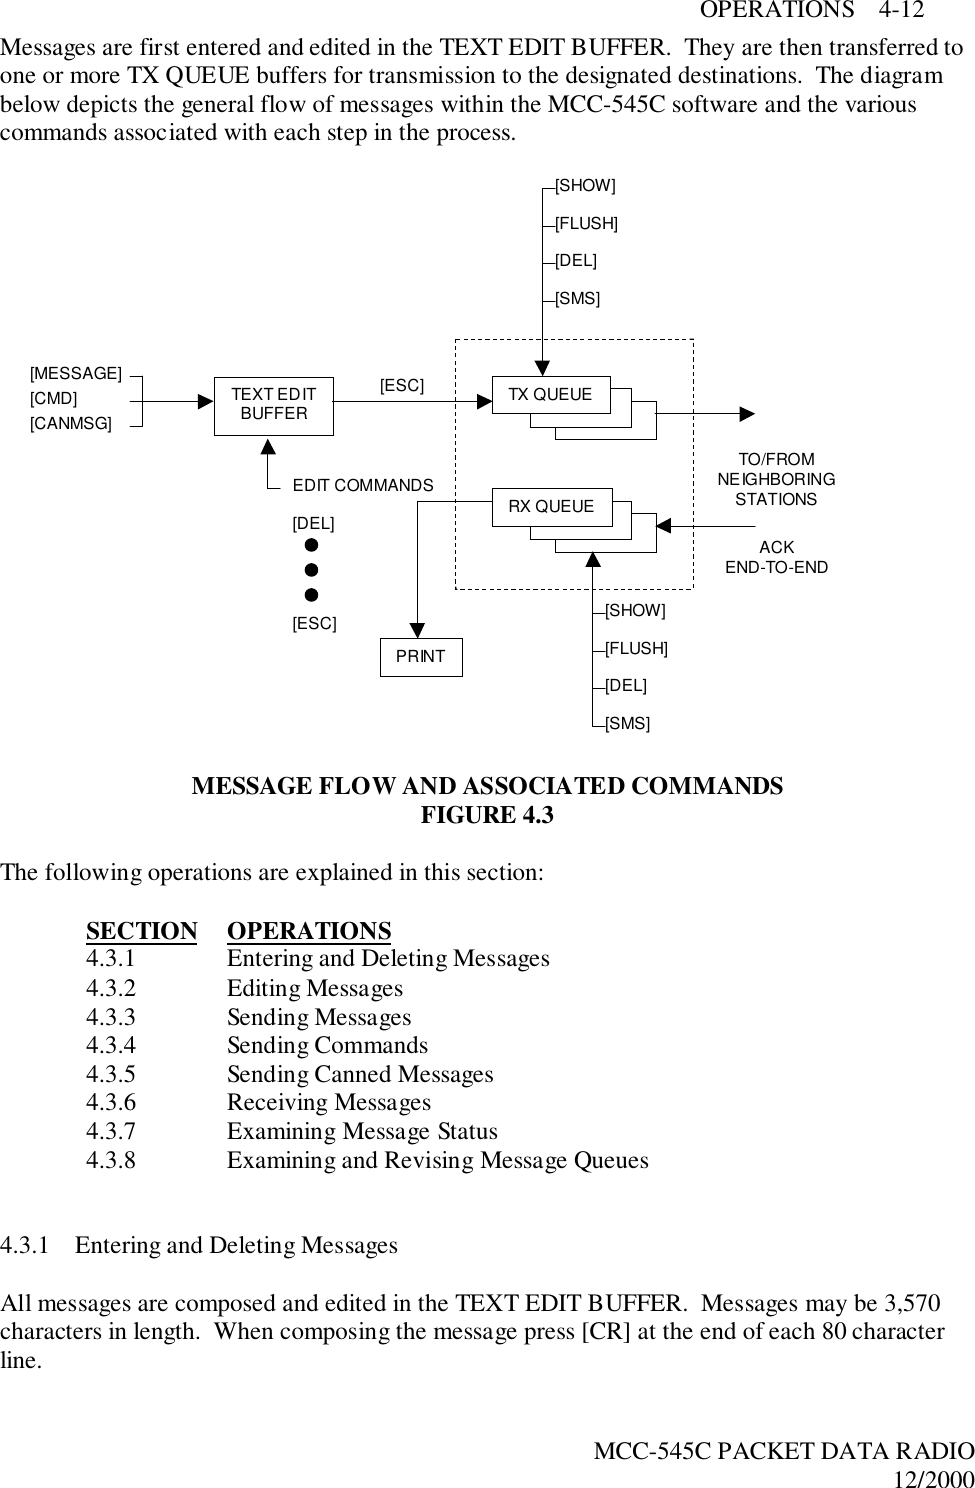 OPERATIONS    4-12MCC-545C PACKET DATA RADIO12/2000Messages are first entered and edited in the TEXT EDIT BUFFER.  They are then transferred toone or more TX QUEUE buffers for transmission to the designated destinations.  The diagrambelow depicts the general flow of messages within the MCC-545C software and the variouscommands associated with each step in the process.MESSAGE FLOW AND ASSOCIATED COMMANDSFIGURE 4.3The following operations are explained in this section:SECTION OPERATIONS4.3.1 Entering and Deleting Messages4.3.2 Editing Messages4.3.3 Sending Messages4.3.4 Sending Commands4.3.5 Sending Canned Messages4.3.6 Receiving Messages4.3.7 Examining Message Status4.3.8 Examining and Revising Message Queues4.3.1 Entering and Deleting MessagesAll messages are composed and edited in the TEXT EDIT BUFFER.  Messages may be 3,570characters in length.  When composing the message press [CR] at the end of each 80 characterline.TX QUEUEPRINTRX QUEUE[SHOW][FLUSH][DEL][SMS][SHOW][FLUSH][DEL][SMS]TEXT EDITBUFFER[MESSAGE][CMD][CANMSG]EDIT COMMANDS[ESC][DEL][ESC]TO/FROMNEIGHBORINGSTATIONSACKEND-TO-END